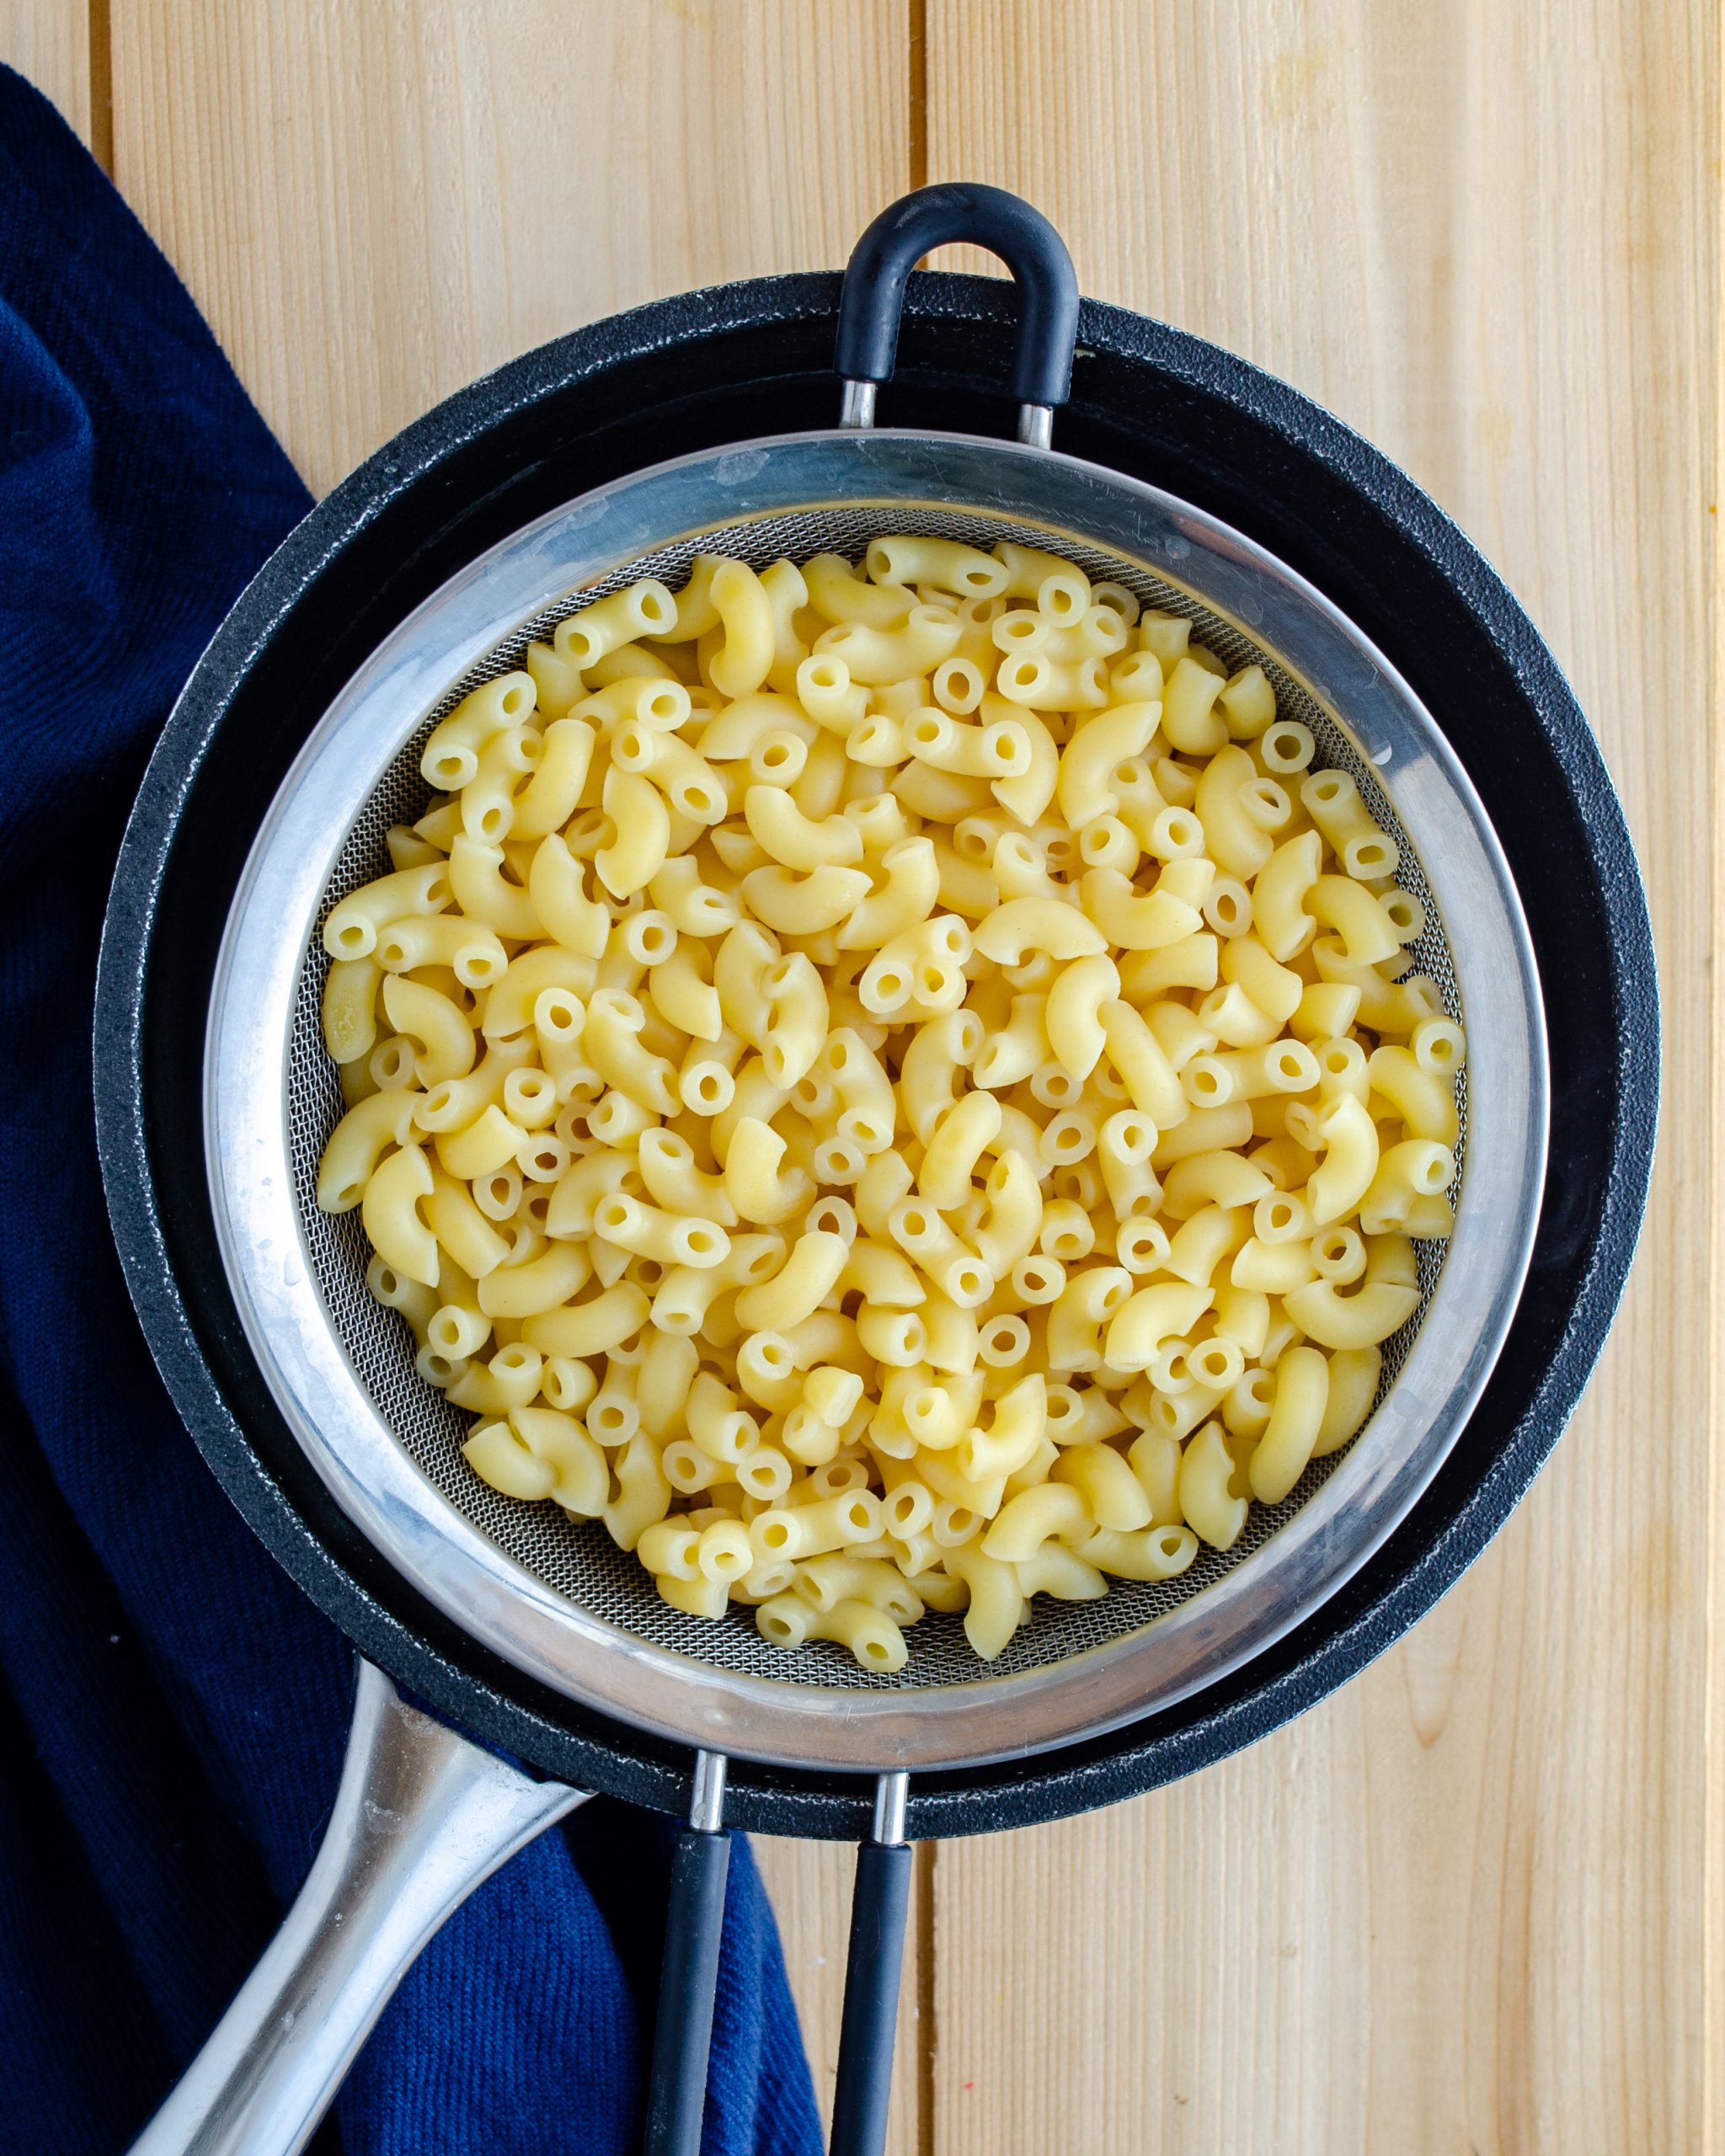 Cook the macaroni in boiling water until done to your liking. Rinse under cold water and drain well. 